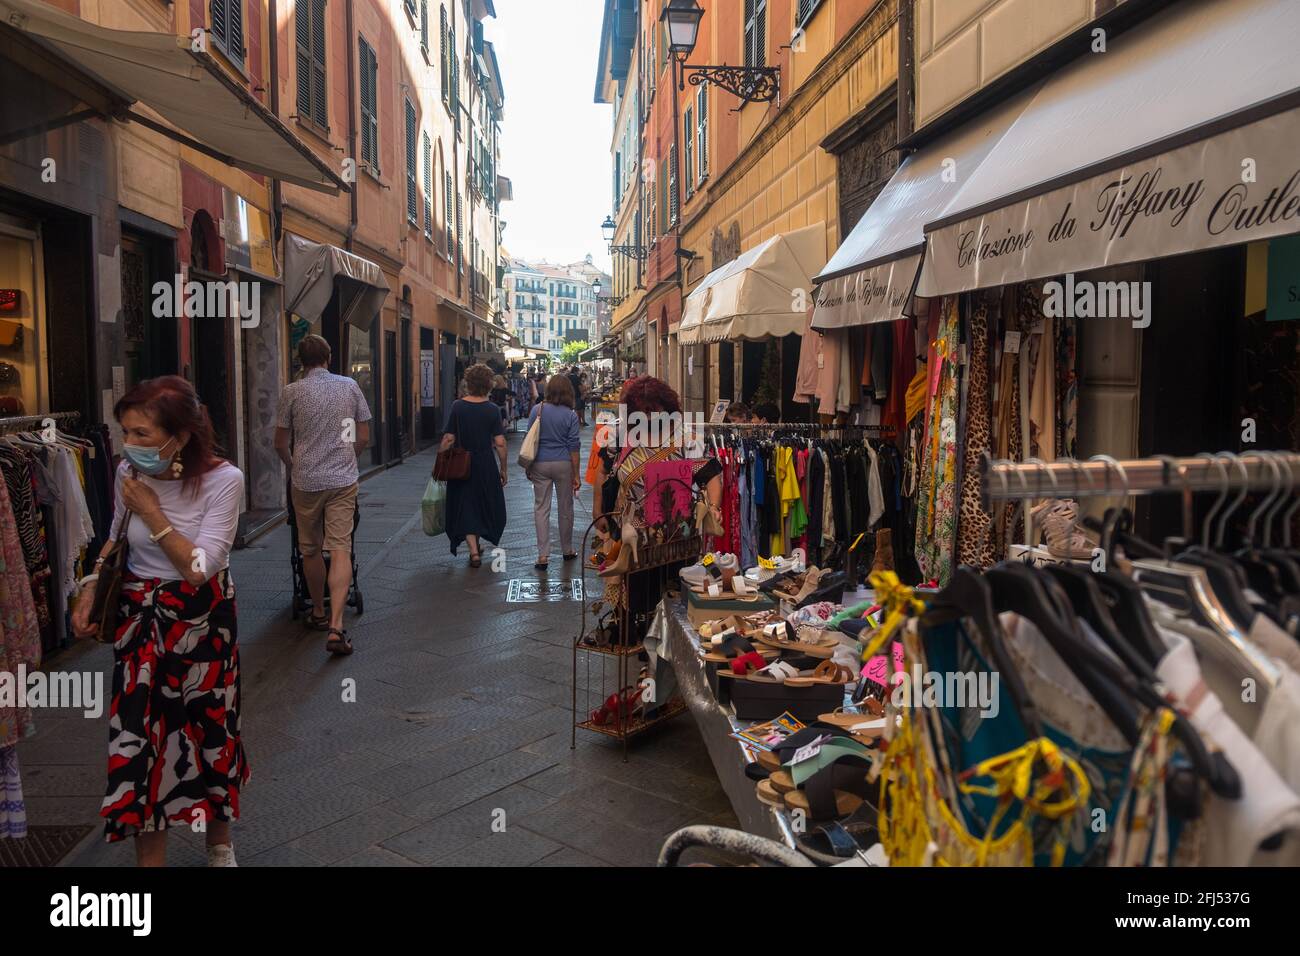 Clothes are for sale outside a store in a narrow shopping street in the pedestrian area of the old town of Rapallo. Stock Photo